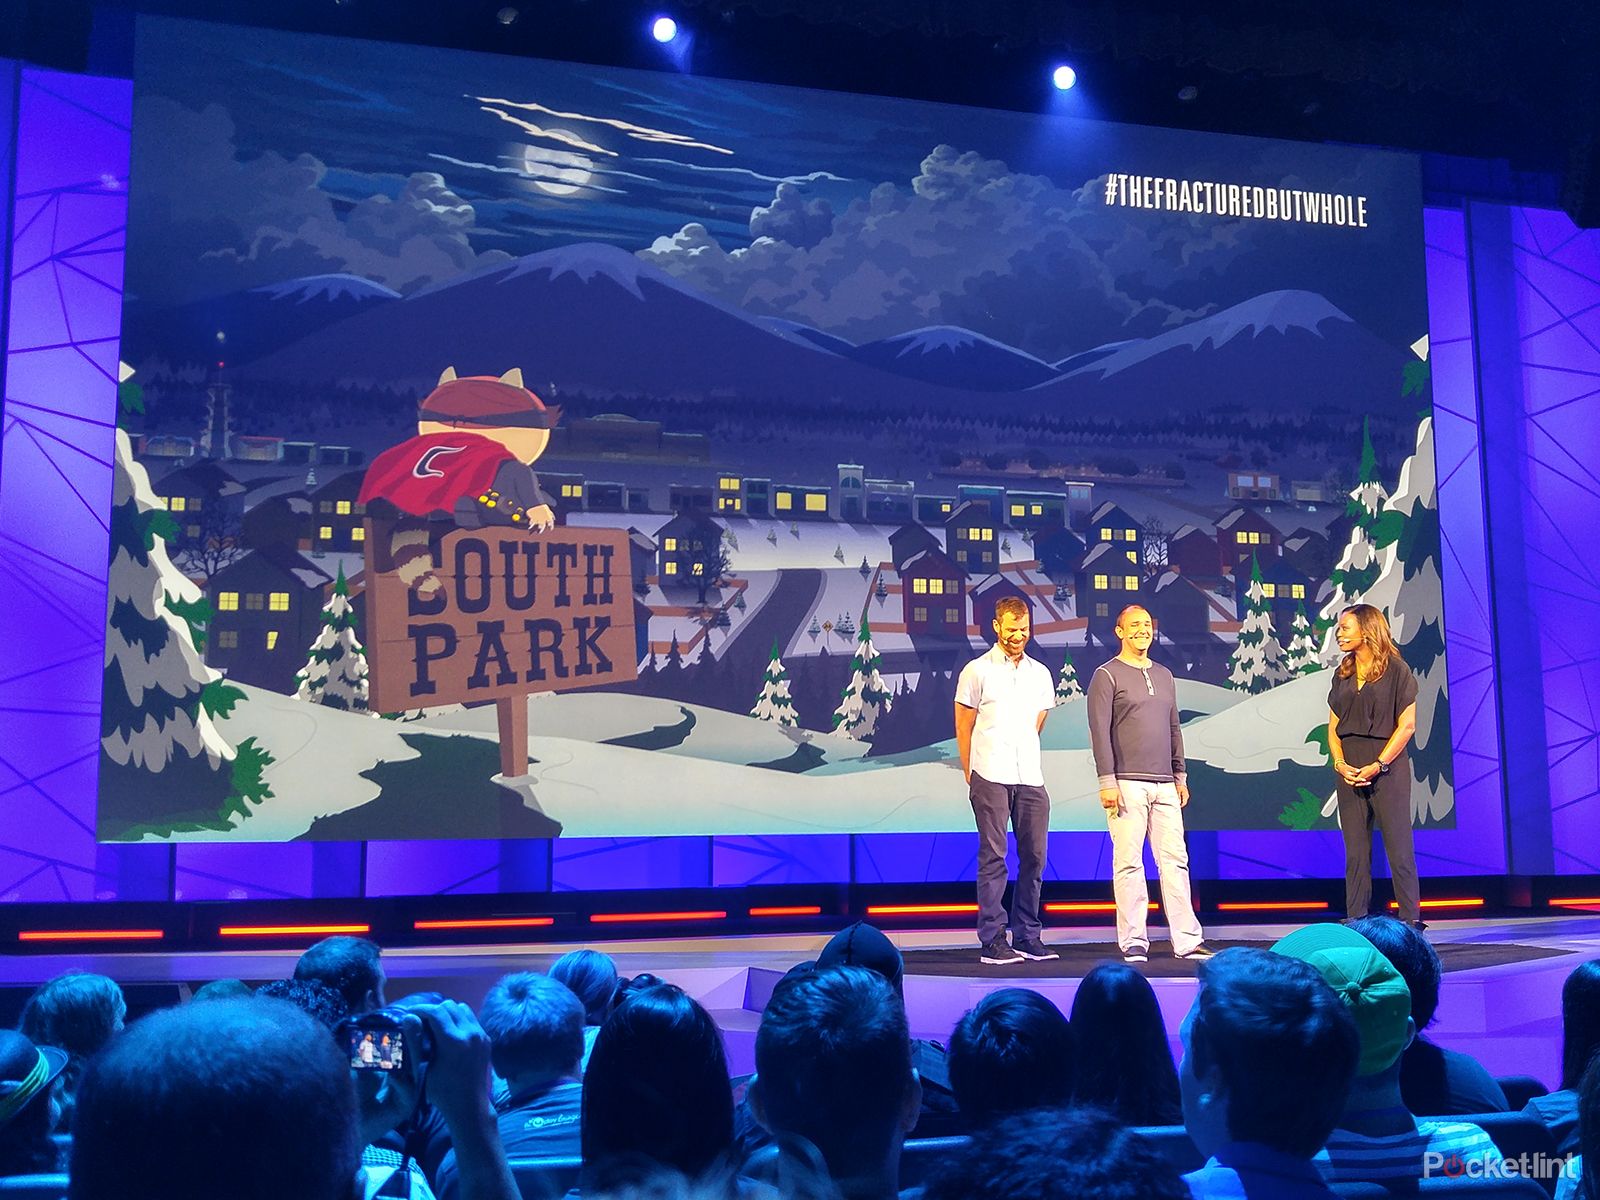 ubisoft at e3 2015 the highlights south park ghost recon assassin’s creed and more image 1